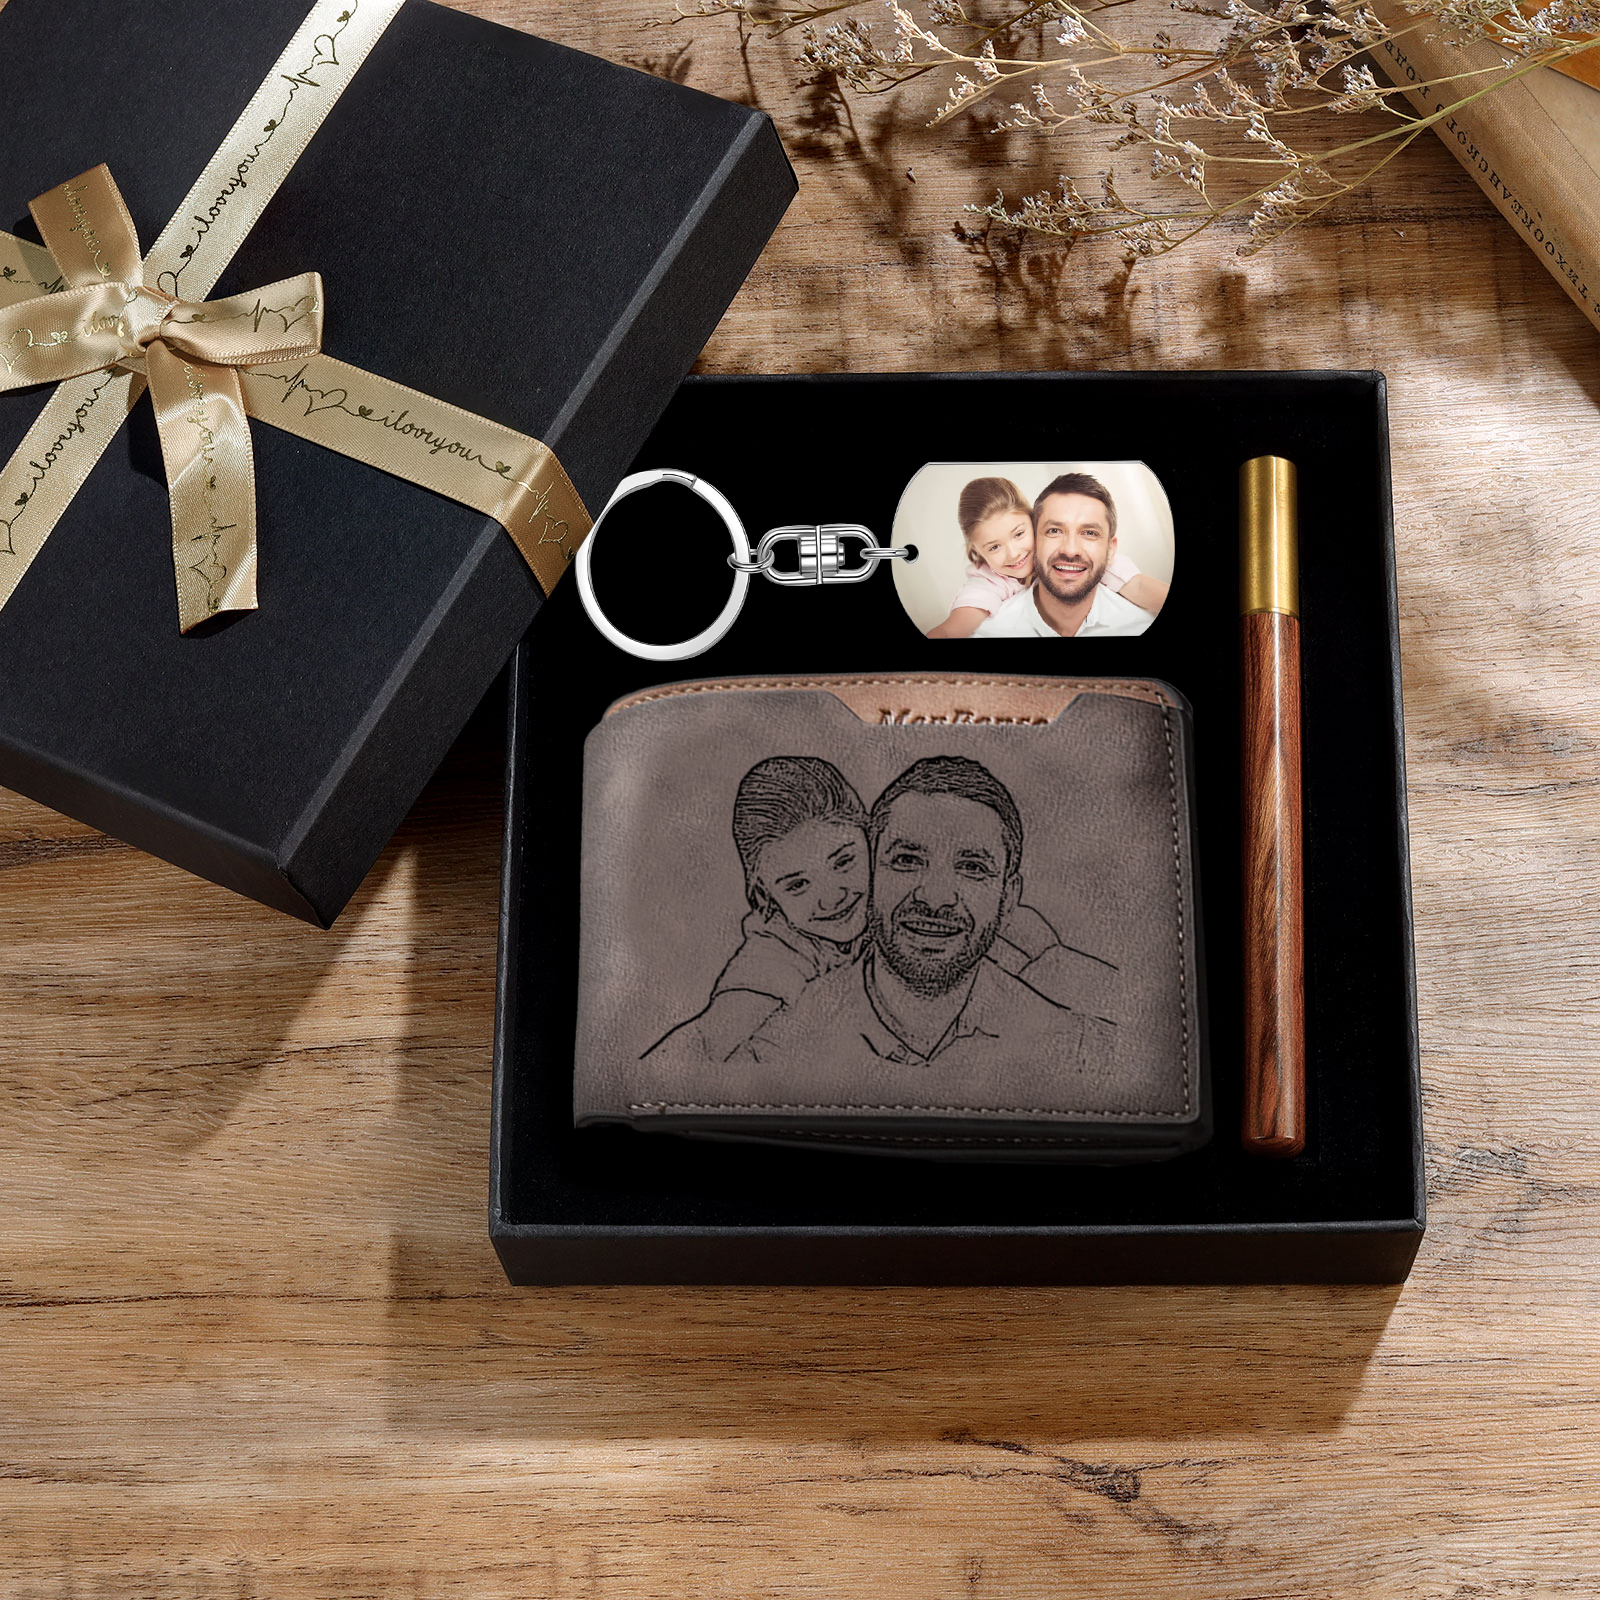 Personalized Leather Wallet Gift Box Set Keychain Strap Customizable 2 Photos 1 Text and 1 Date Gift for Dad